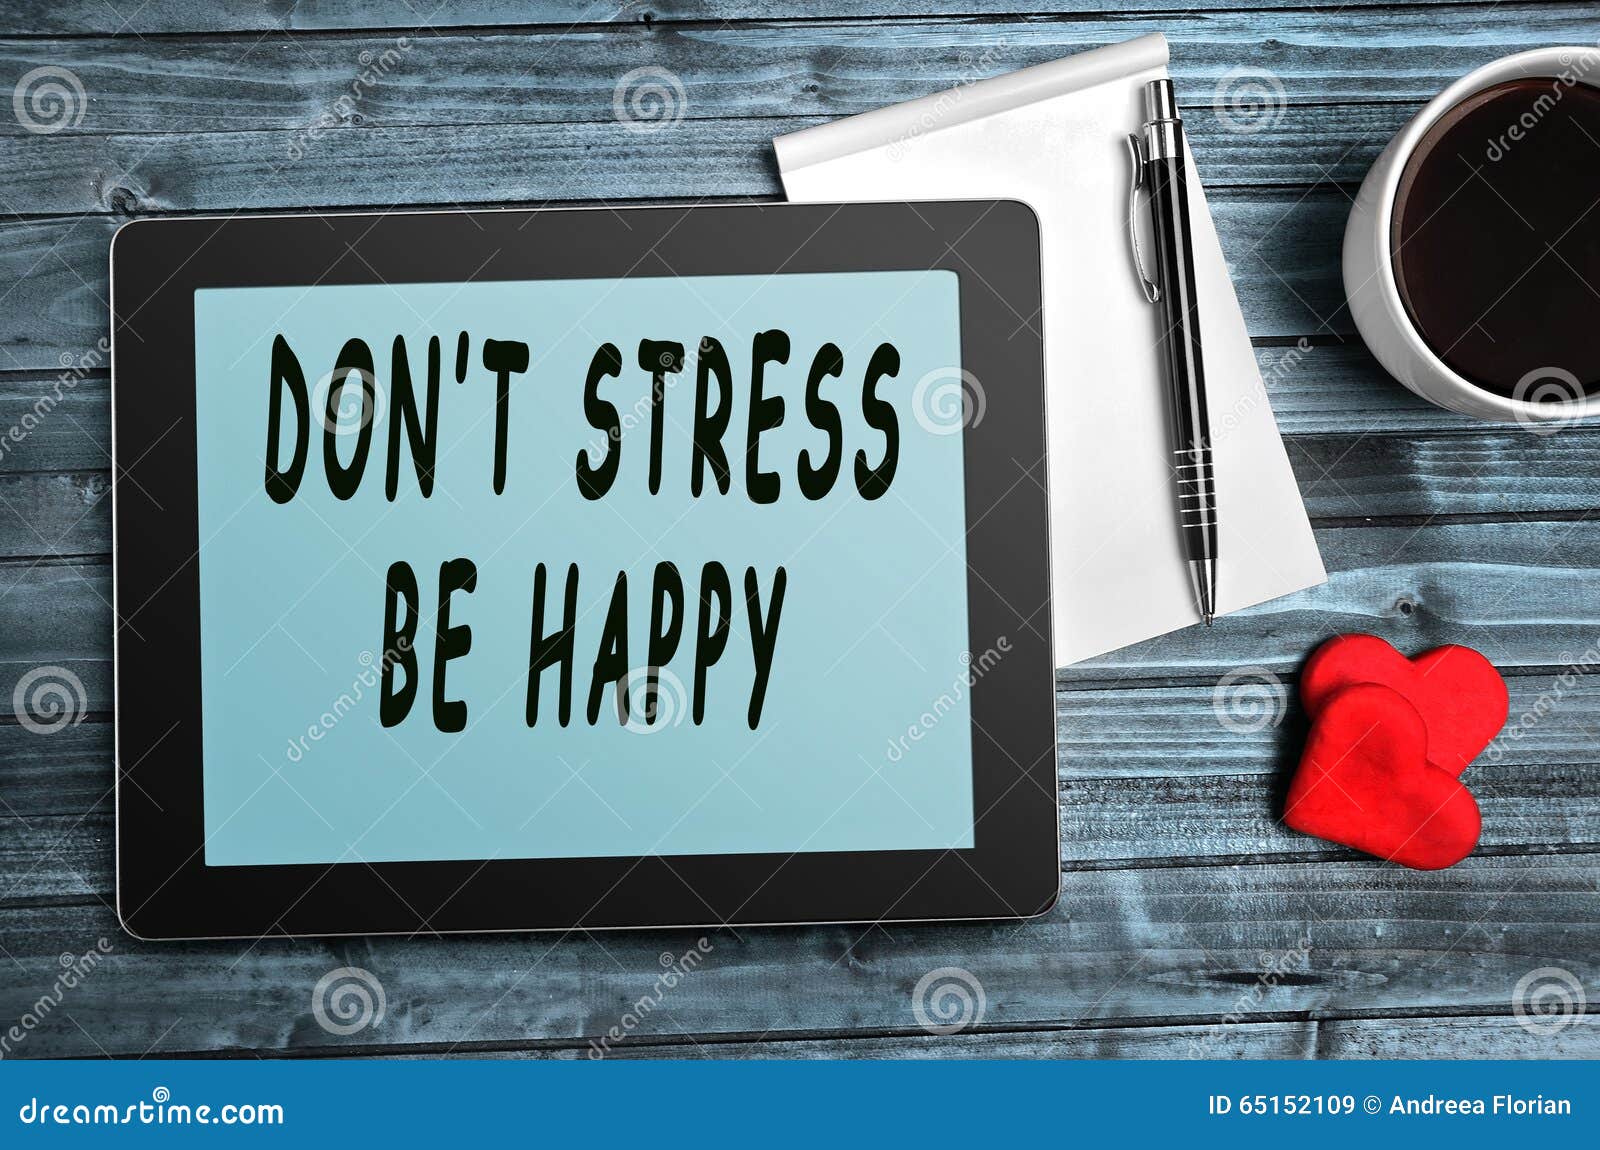 Don T Stress,be Happy Quotes Stock Image - Image of dont, message ...